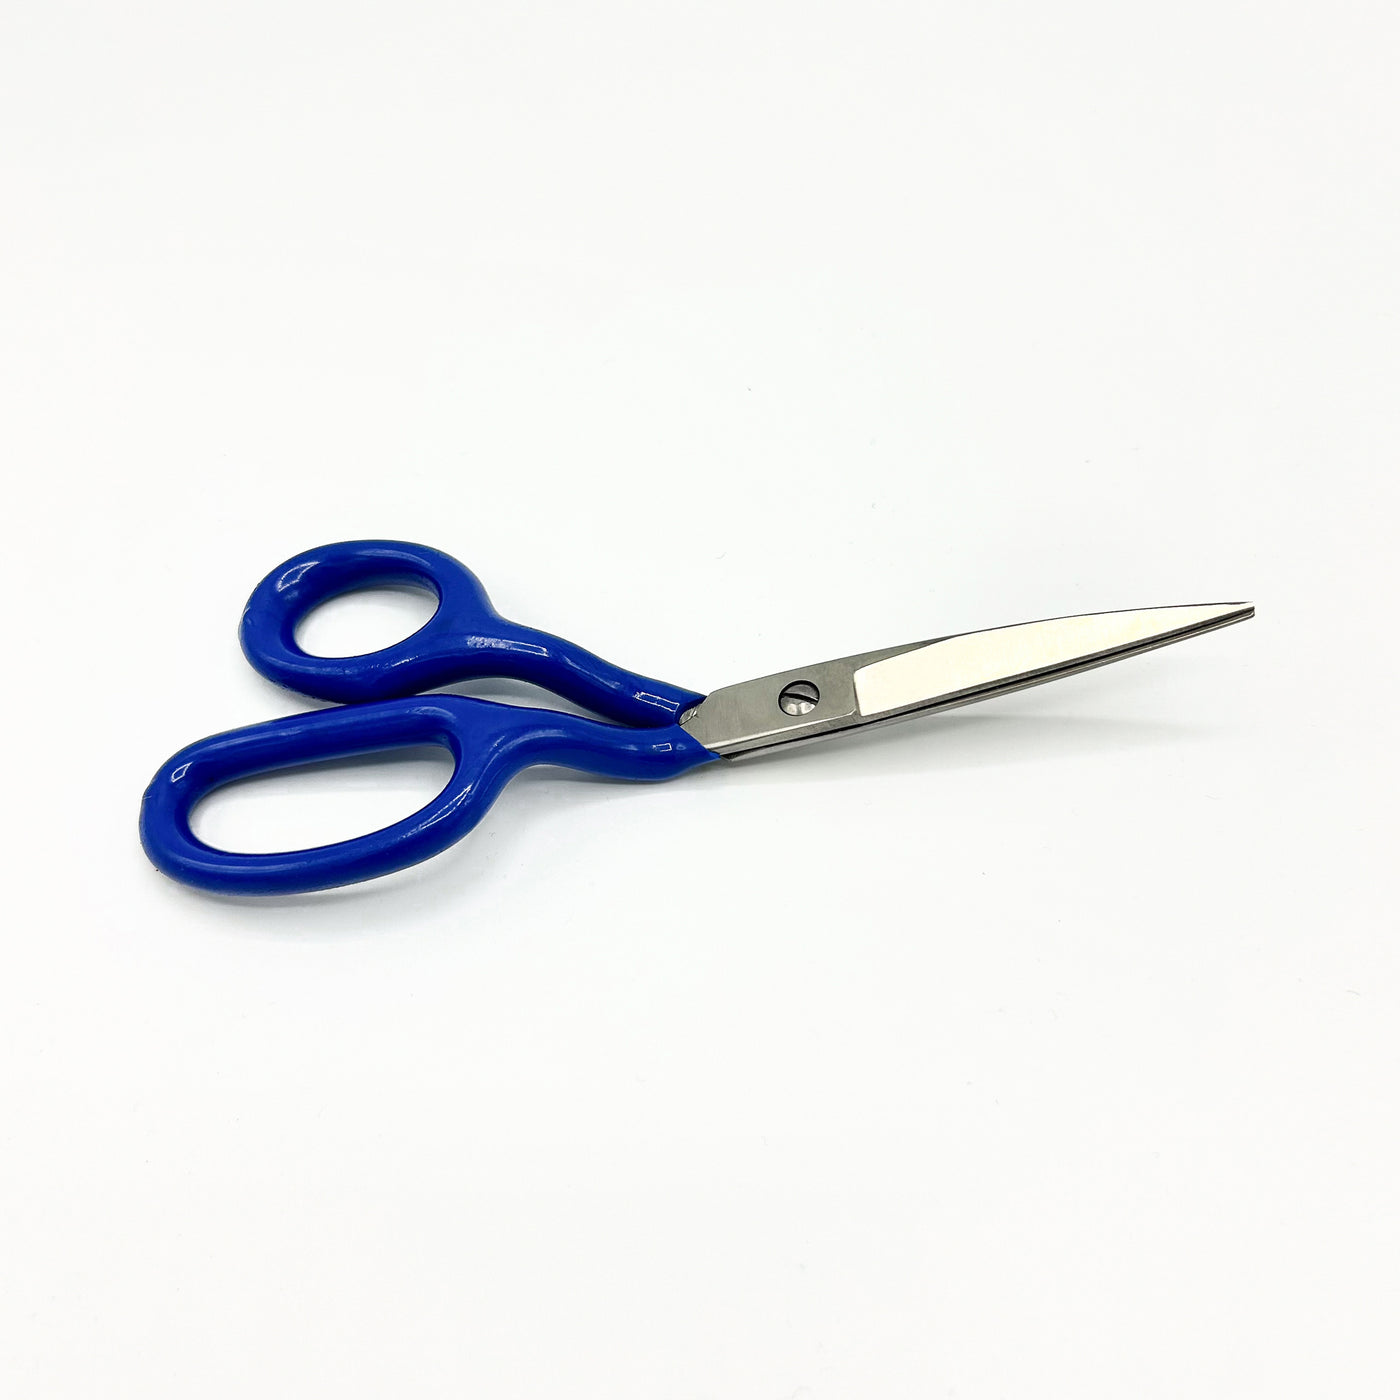 Solid iron rug carving scissors, with extra polishing and rubber handles for enhanced comfort and performance